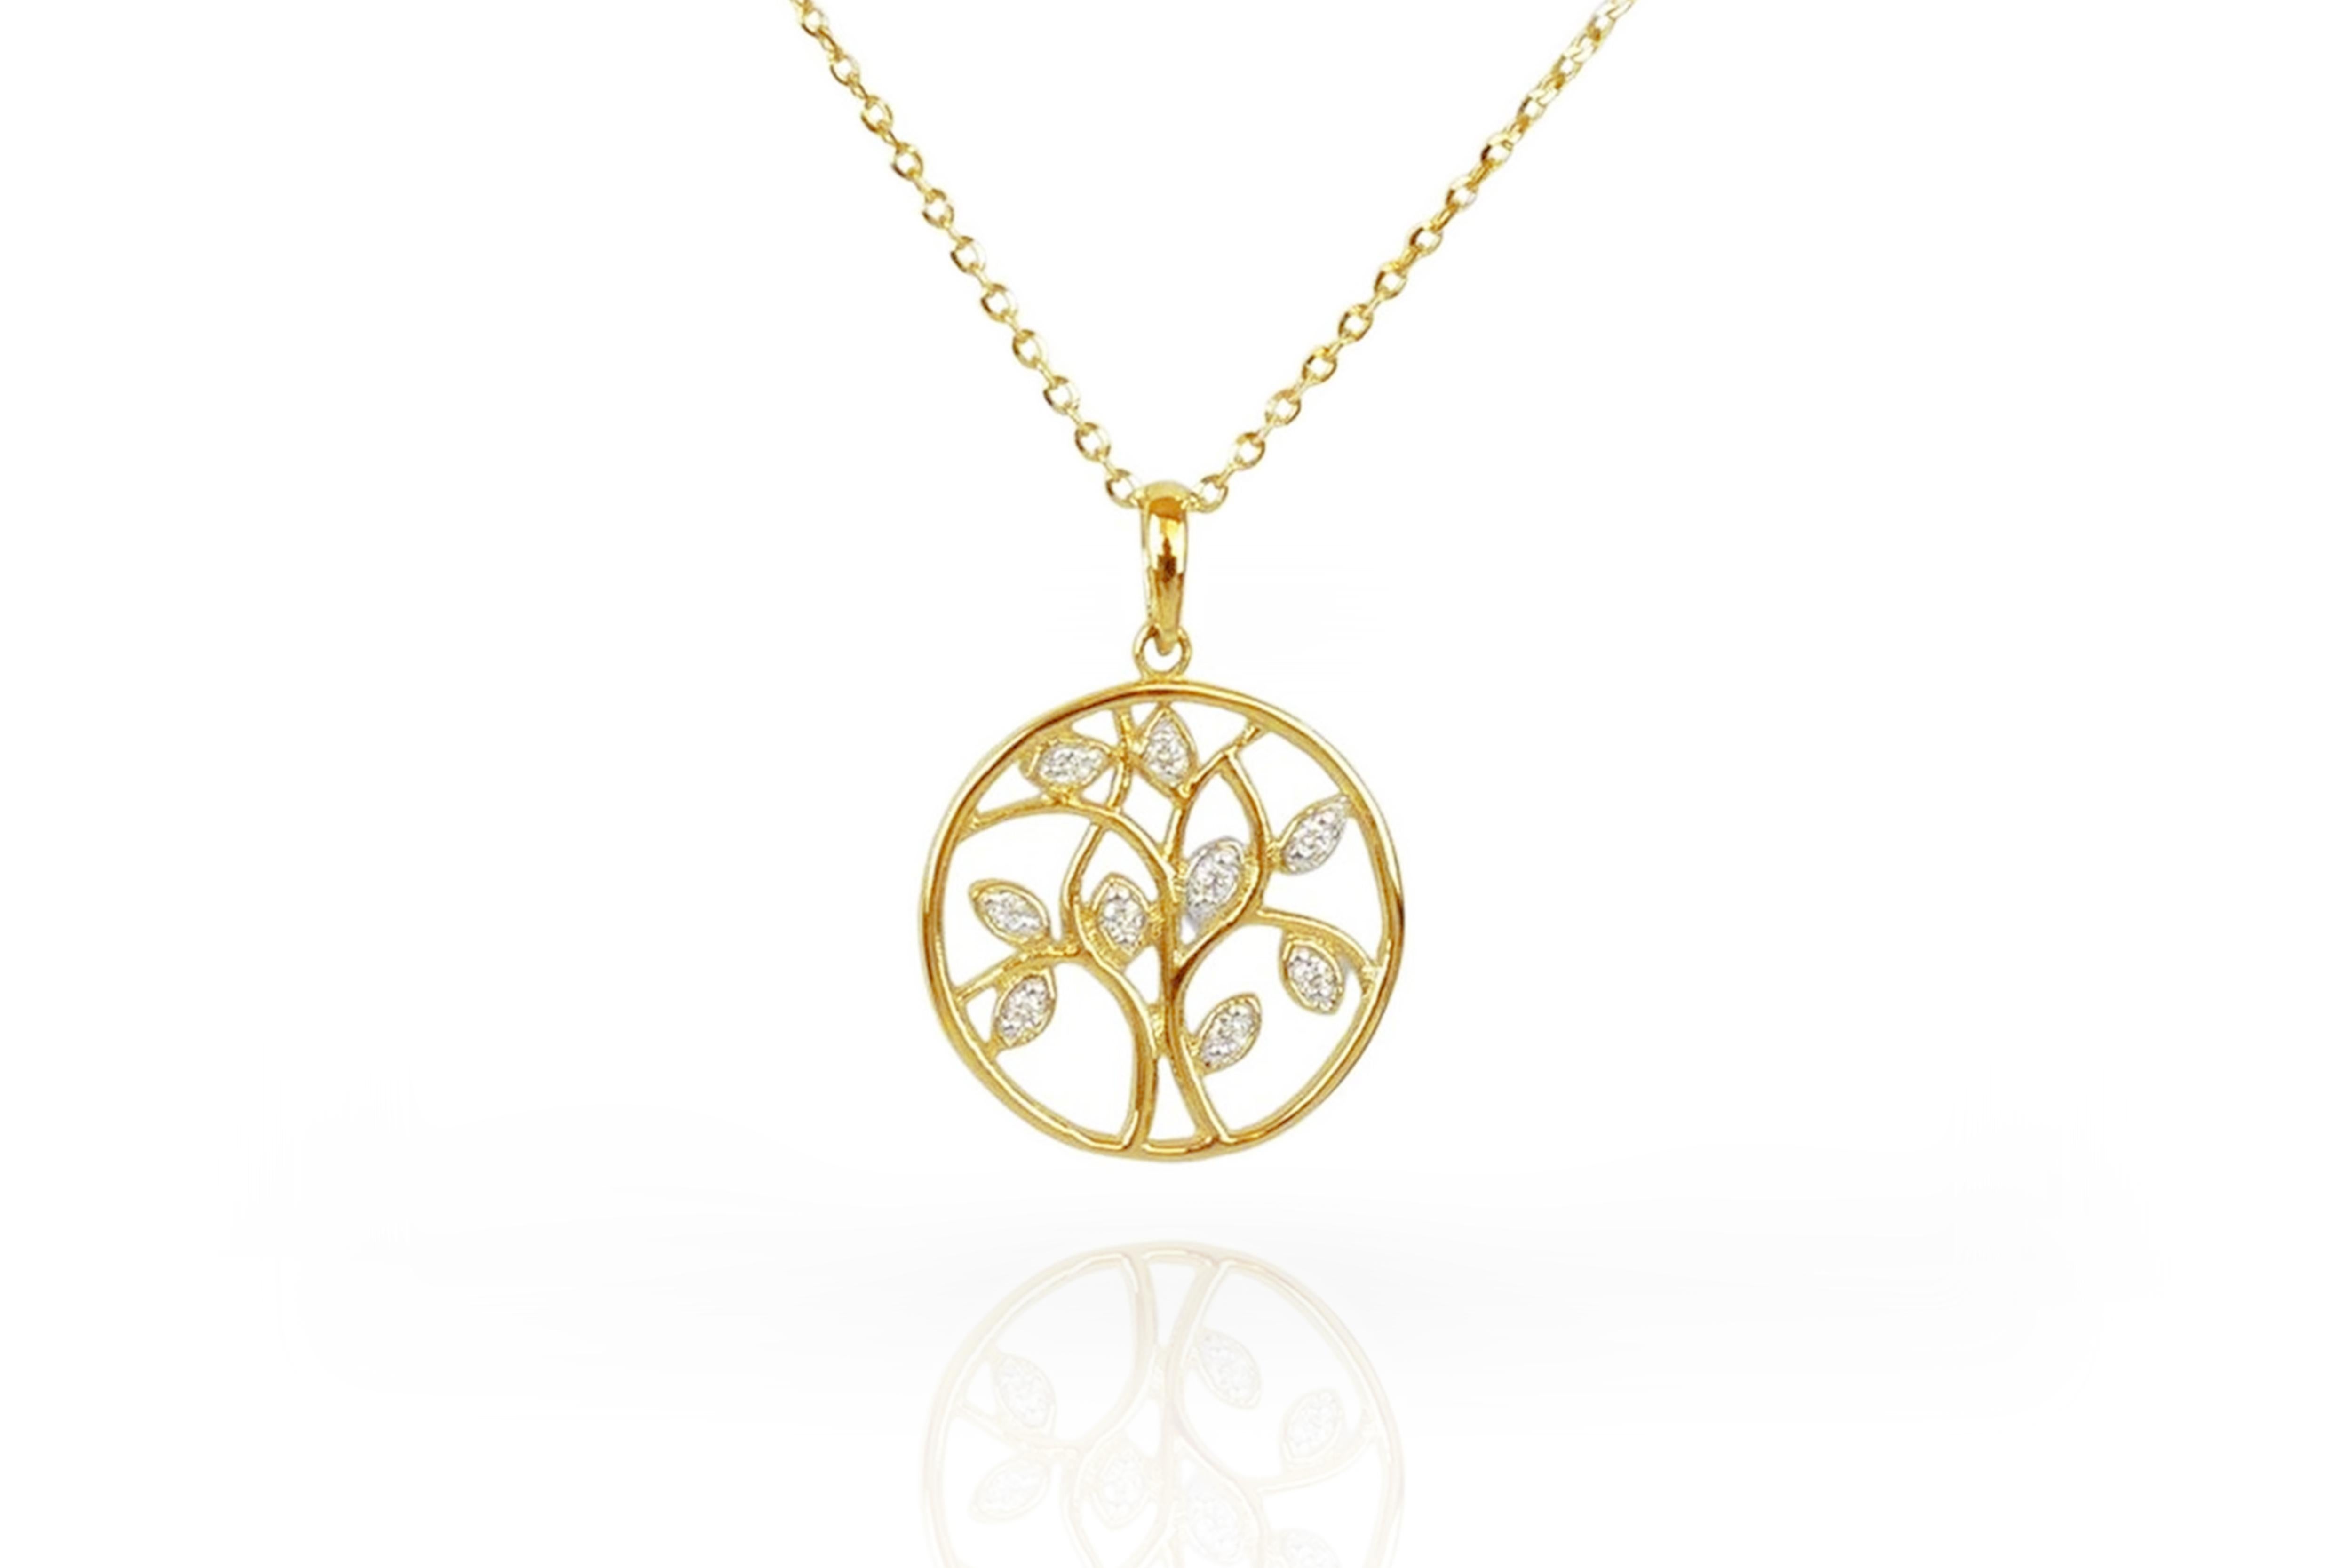 Tree of Life Pendent with Diamond Accents Floating On Delicate Thin Gold Chain is made of 14k solid gold.
Available in three colors of gold: White Gold / Rose Gold / Yellow Gold.

9 round cut diamonds set the shape of the simple and elegant design